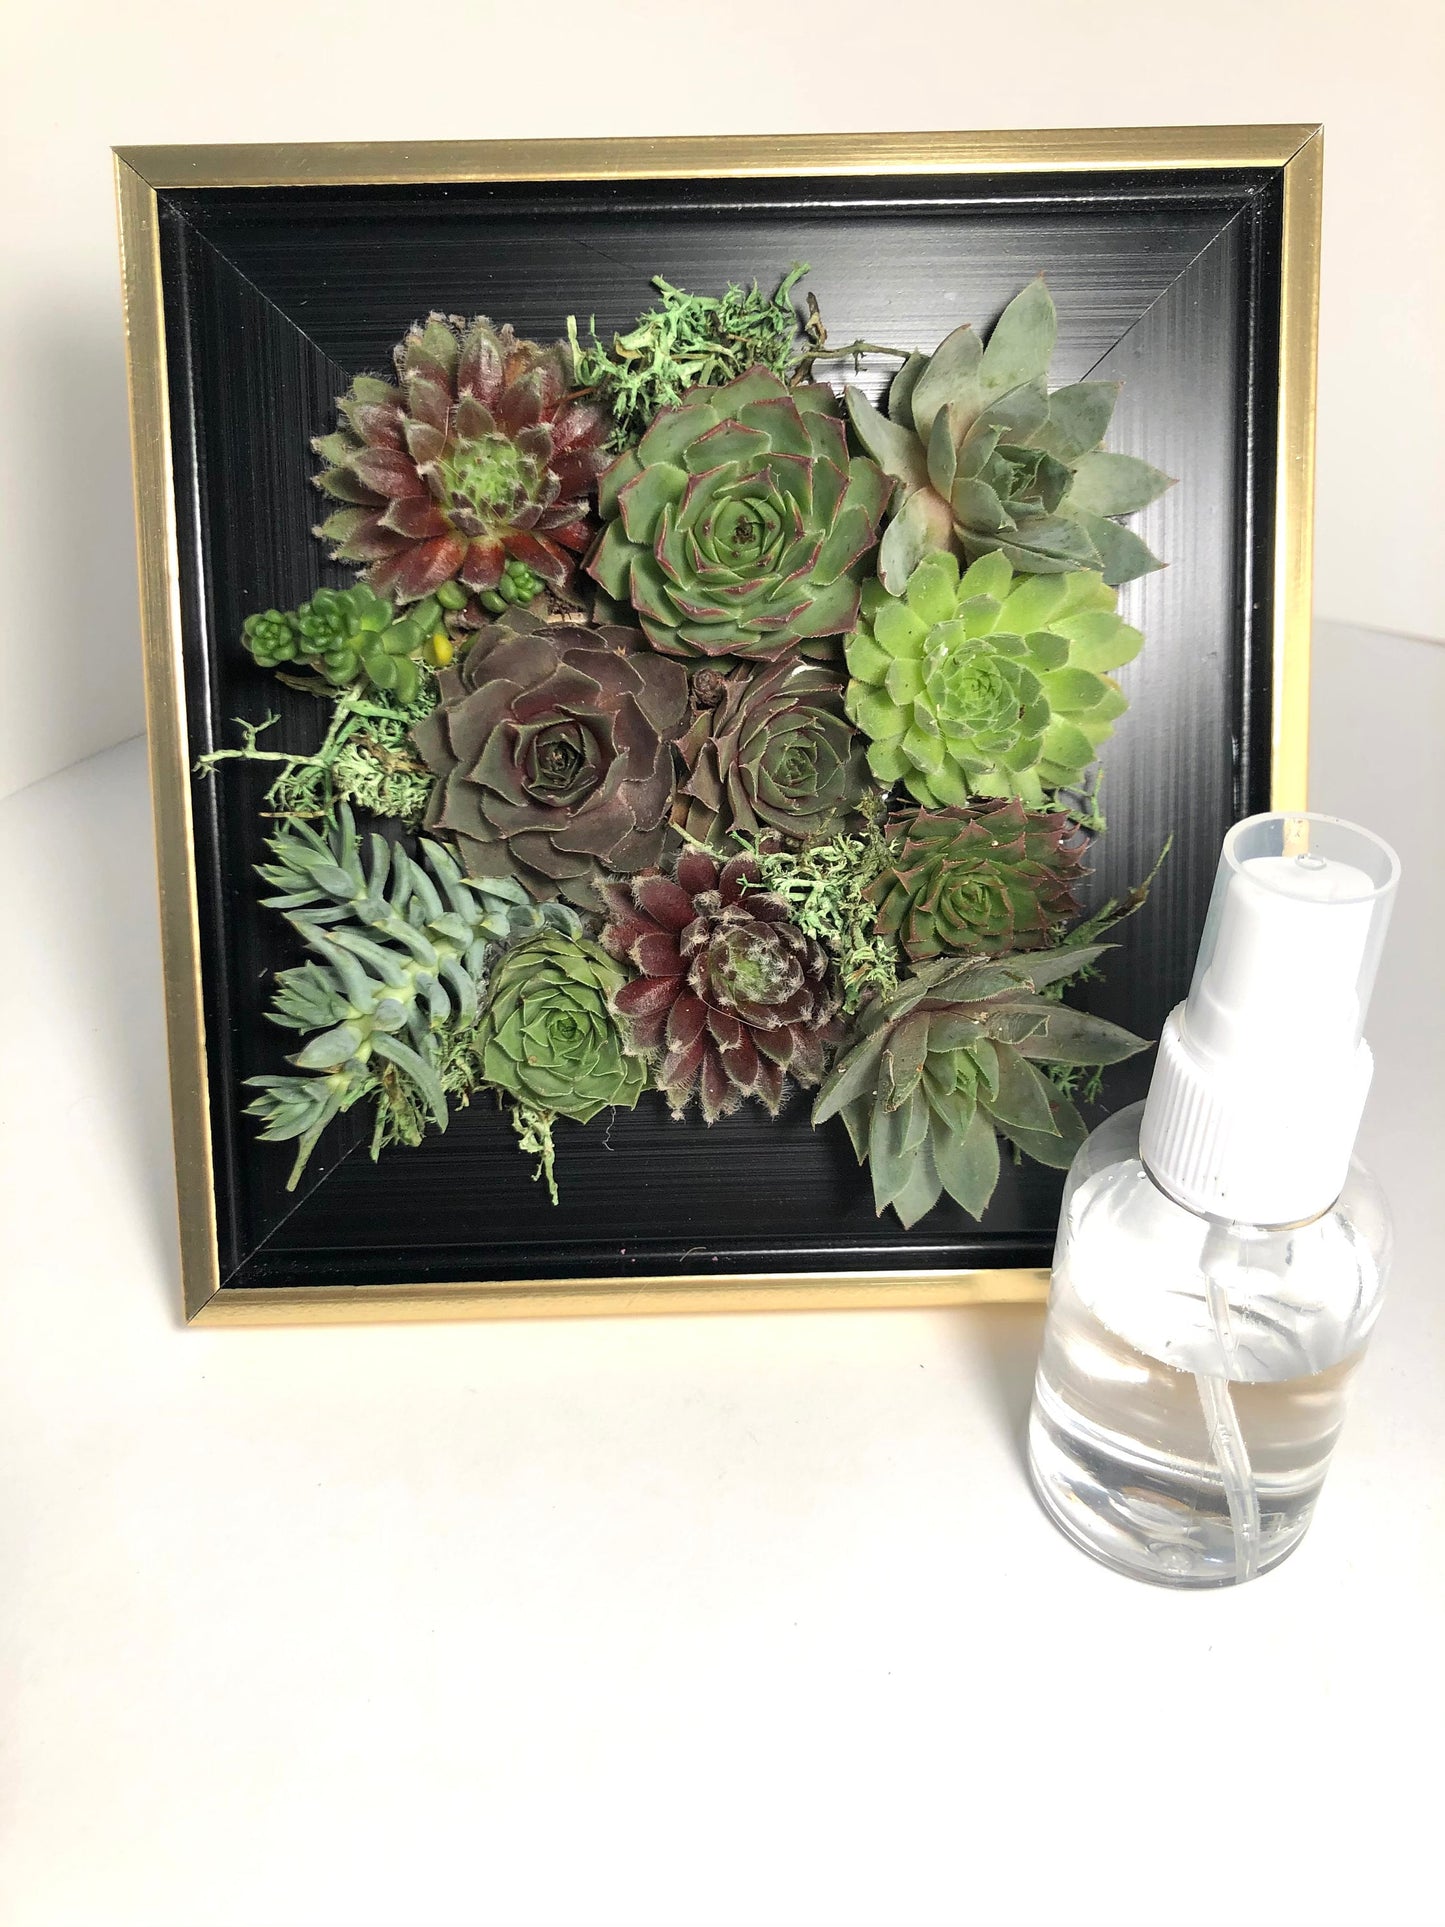 Live Succulent Picture Frame Gift, Free Shipping